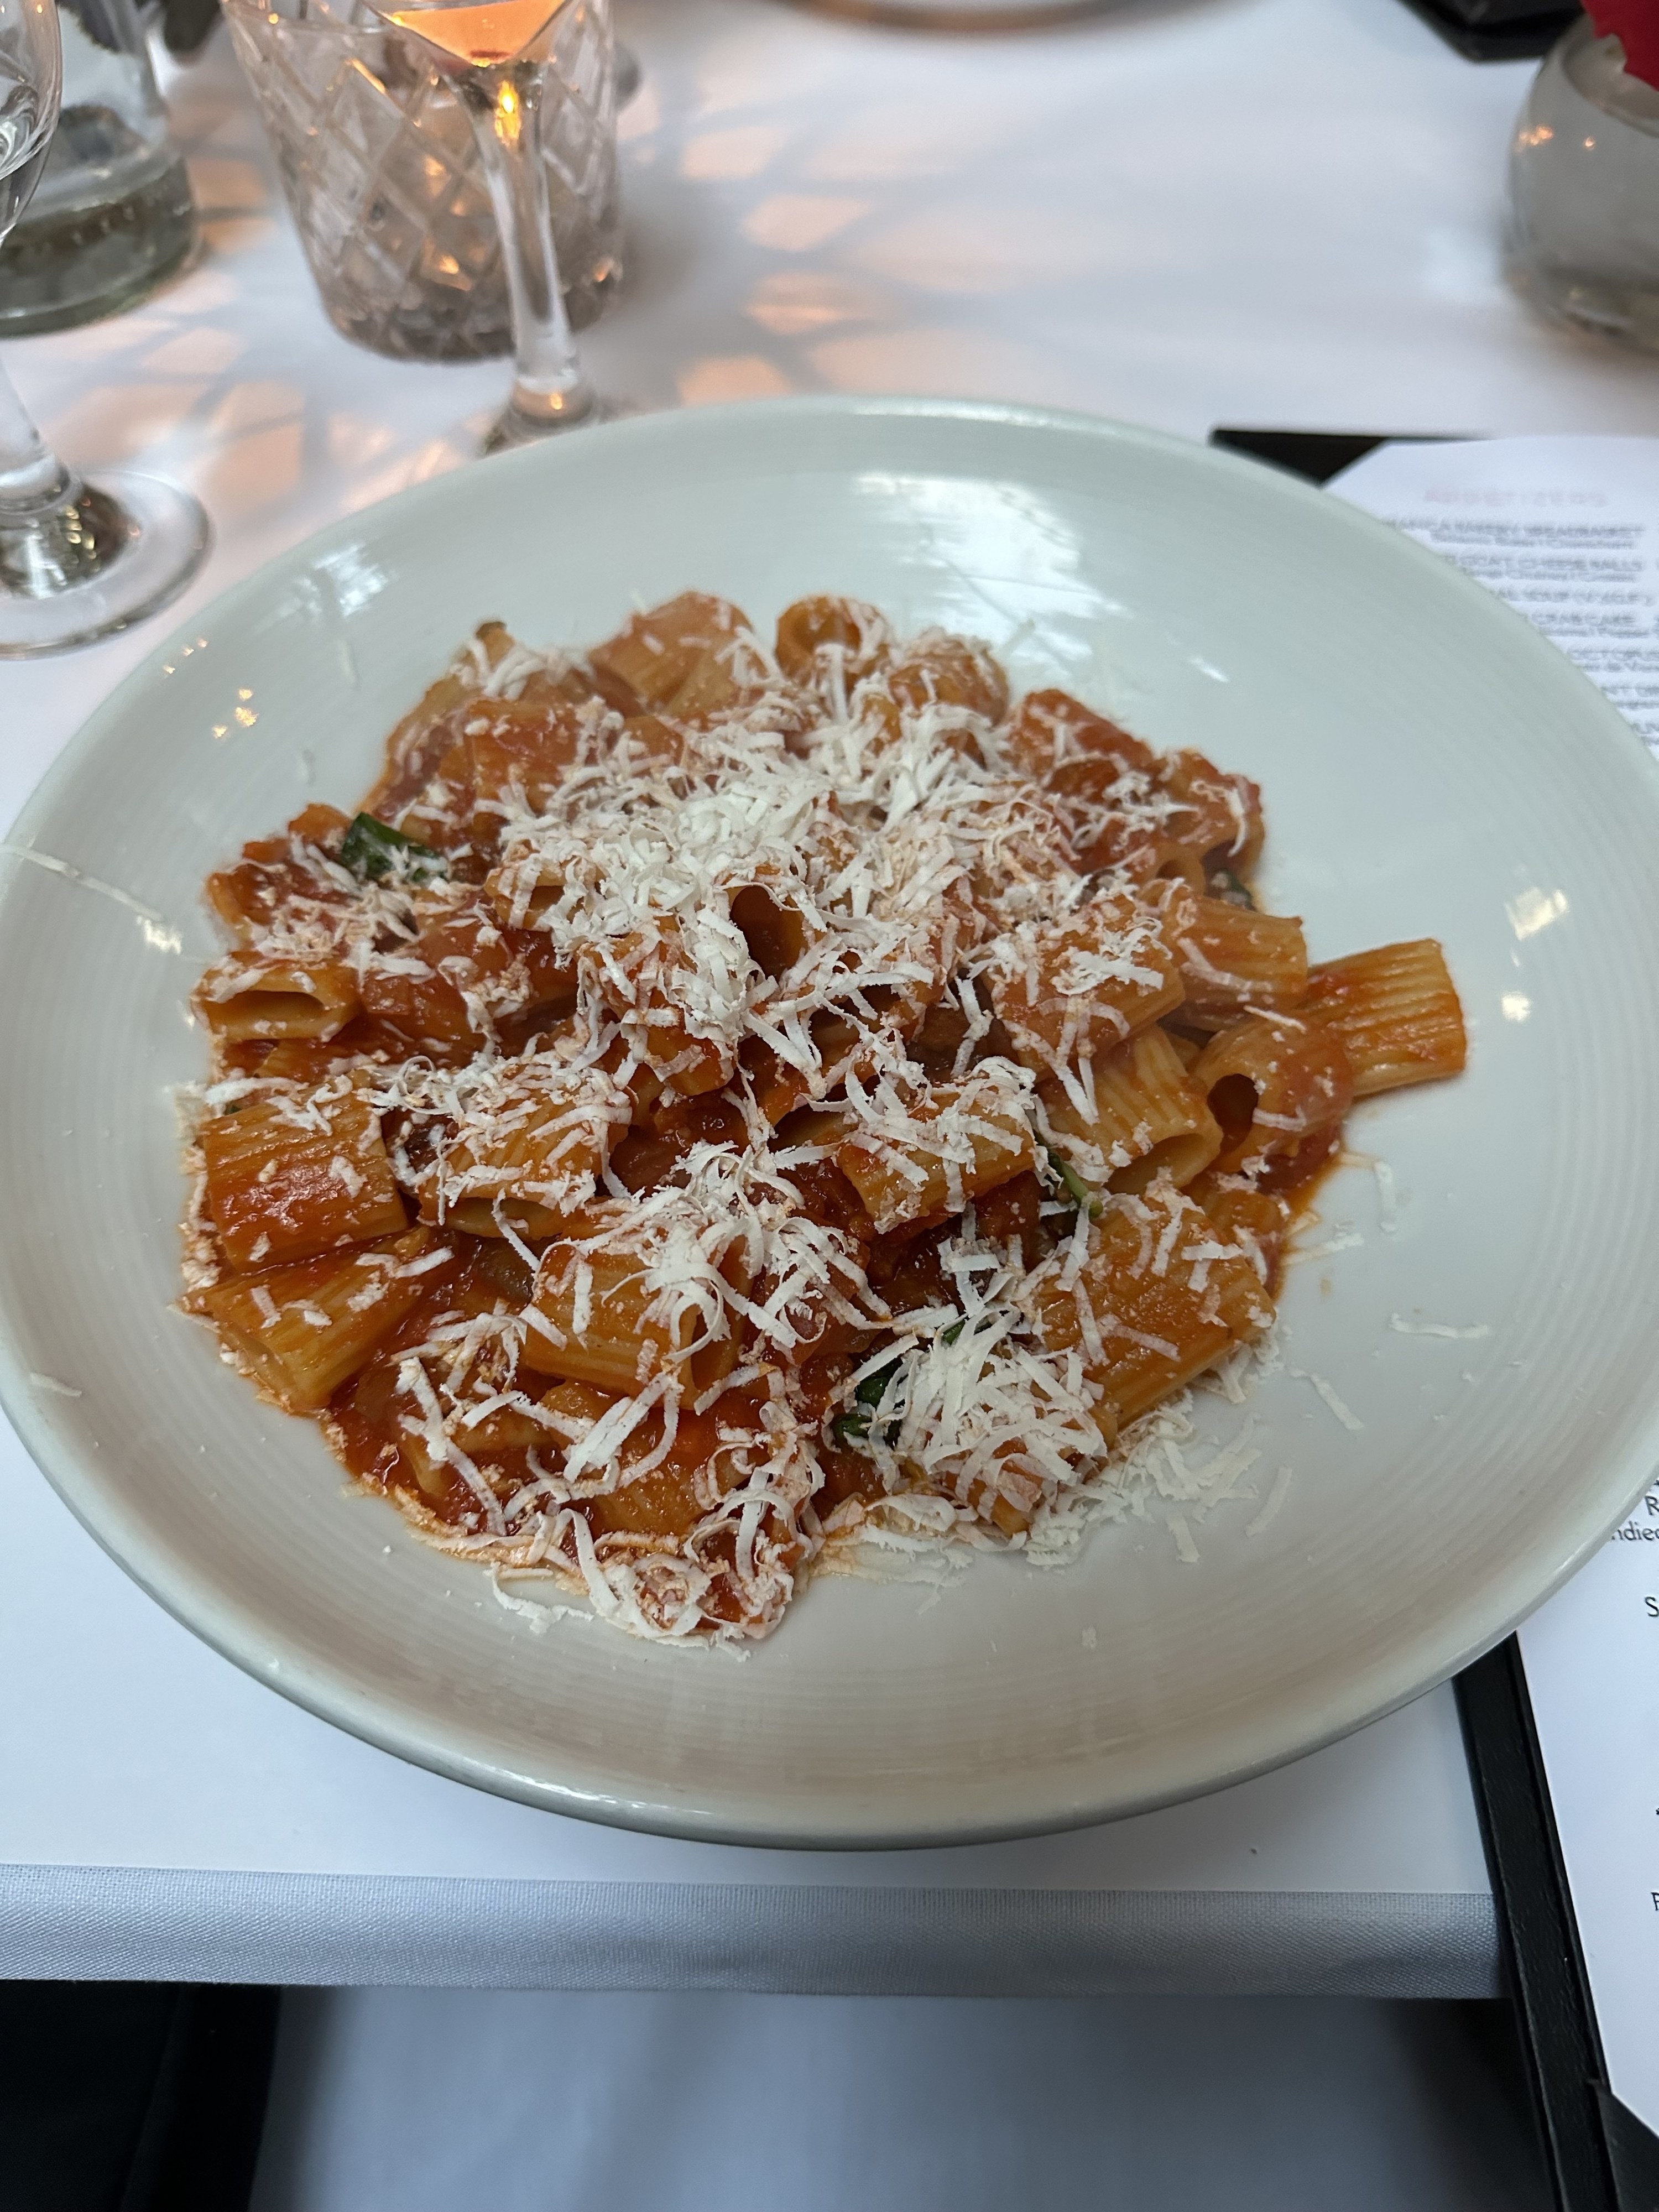 A shot of the pasta dish